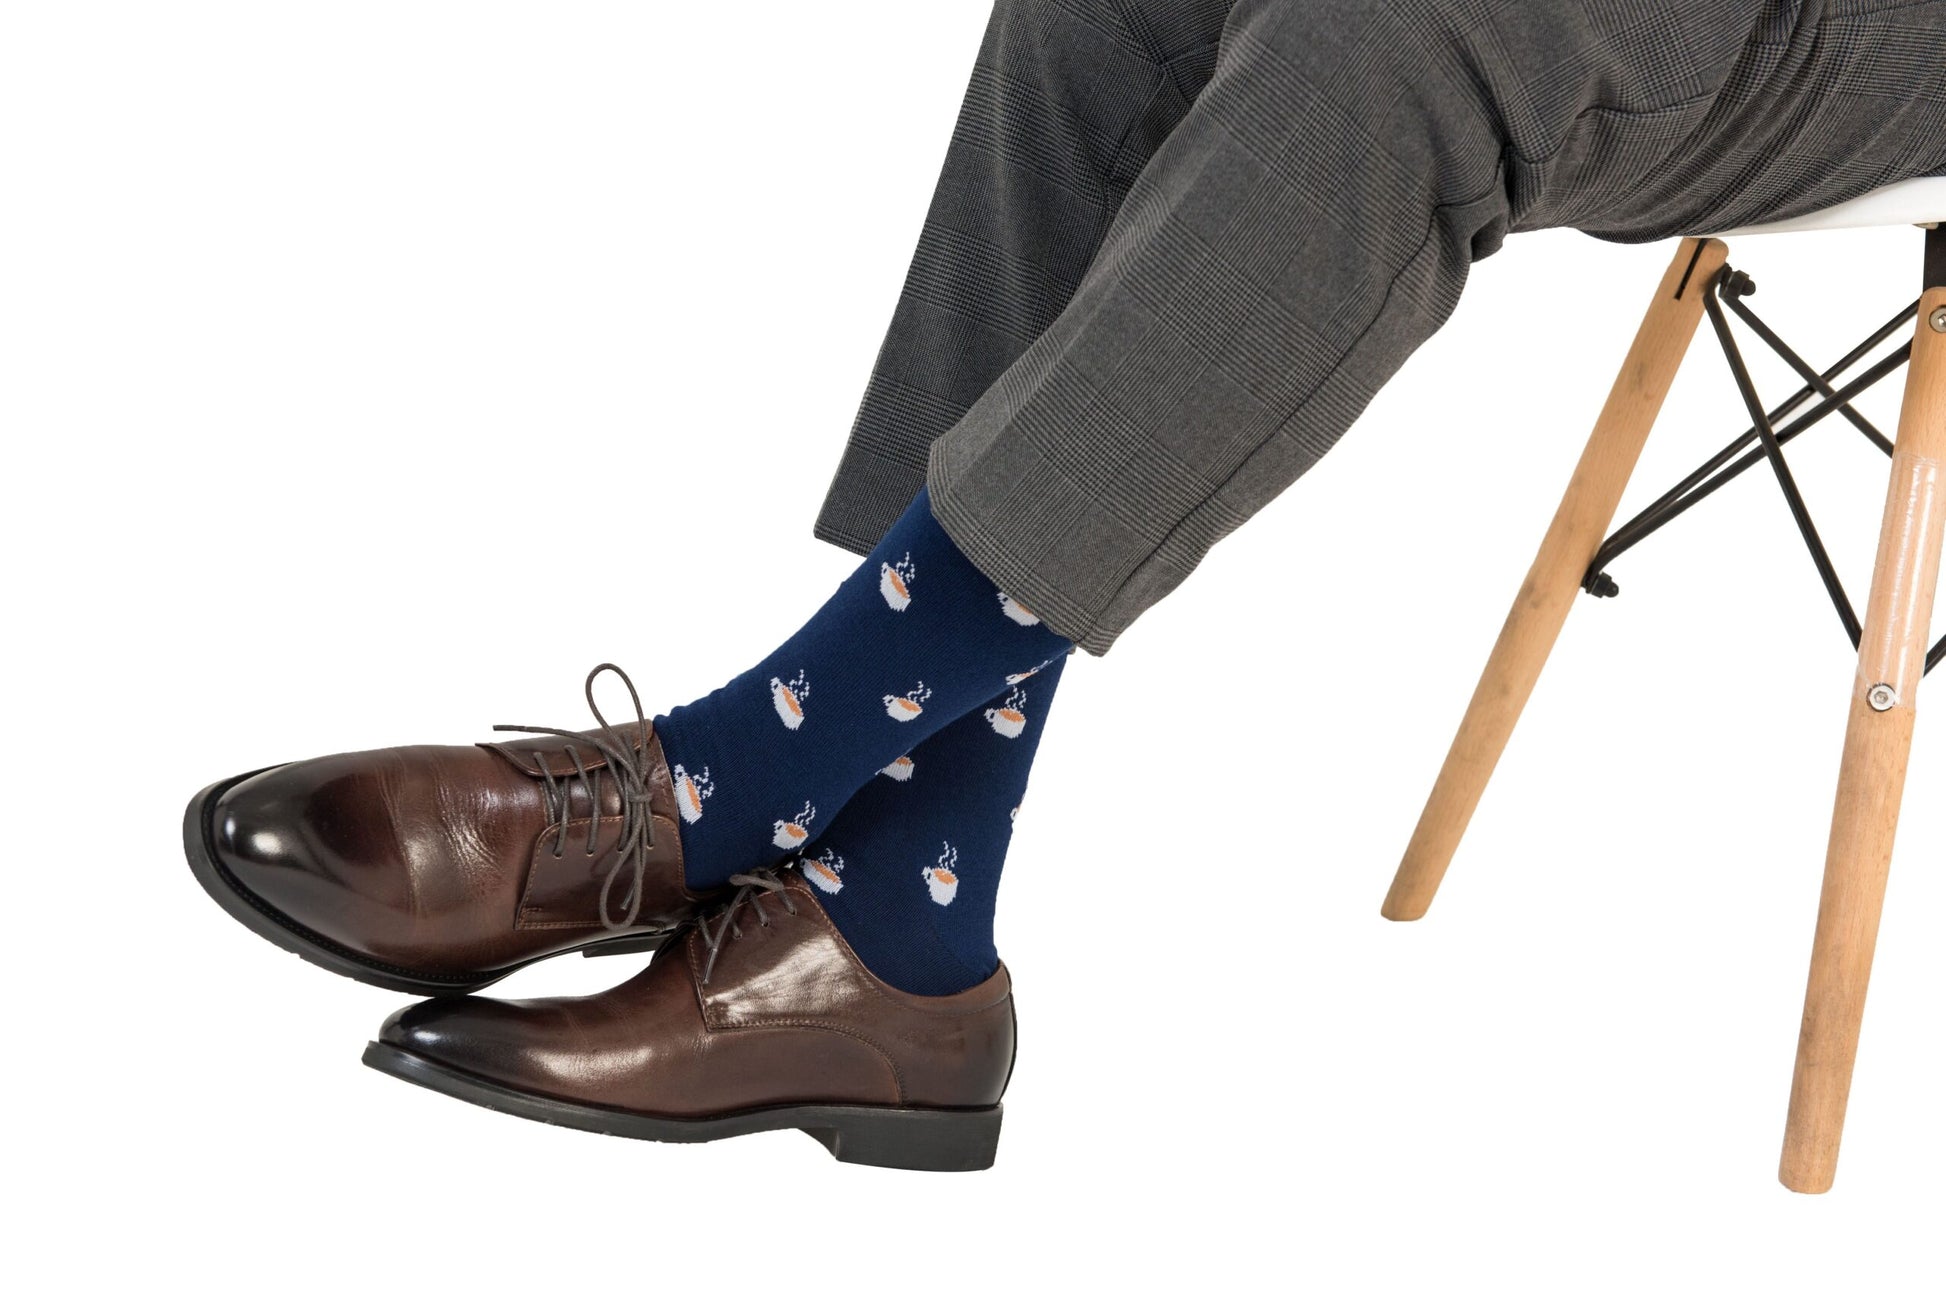 A man sitting on a chair wearing a pair of Coffee Socks.